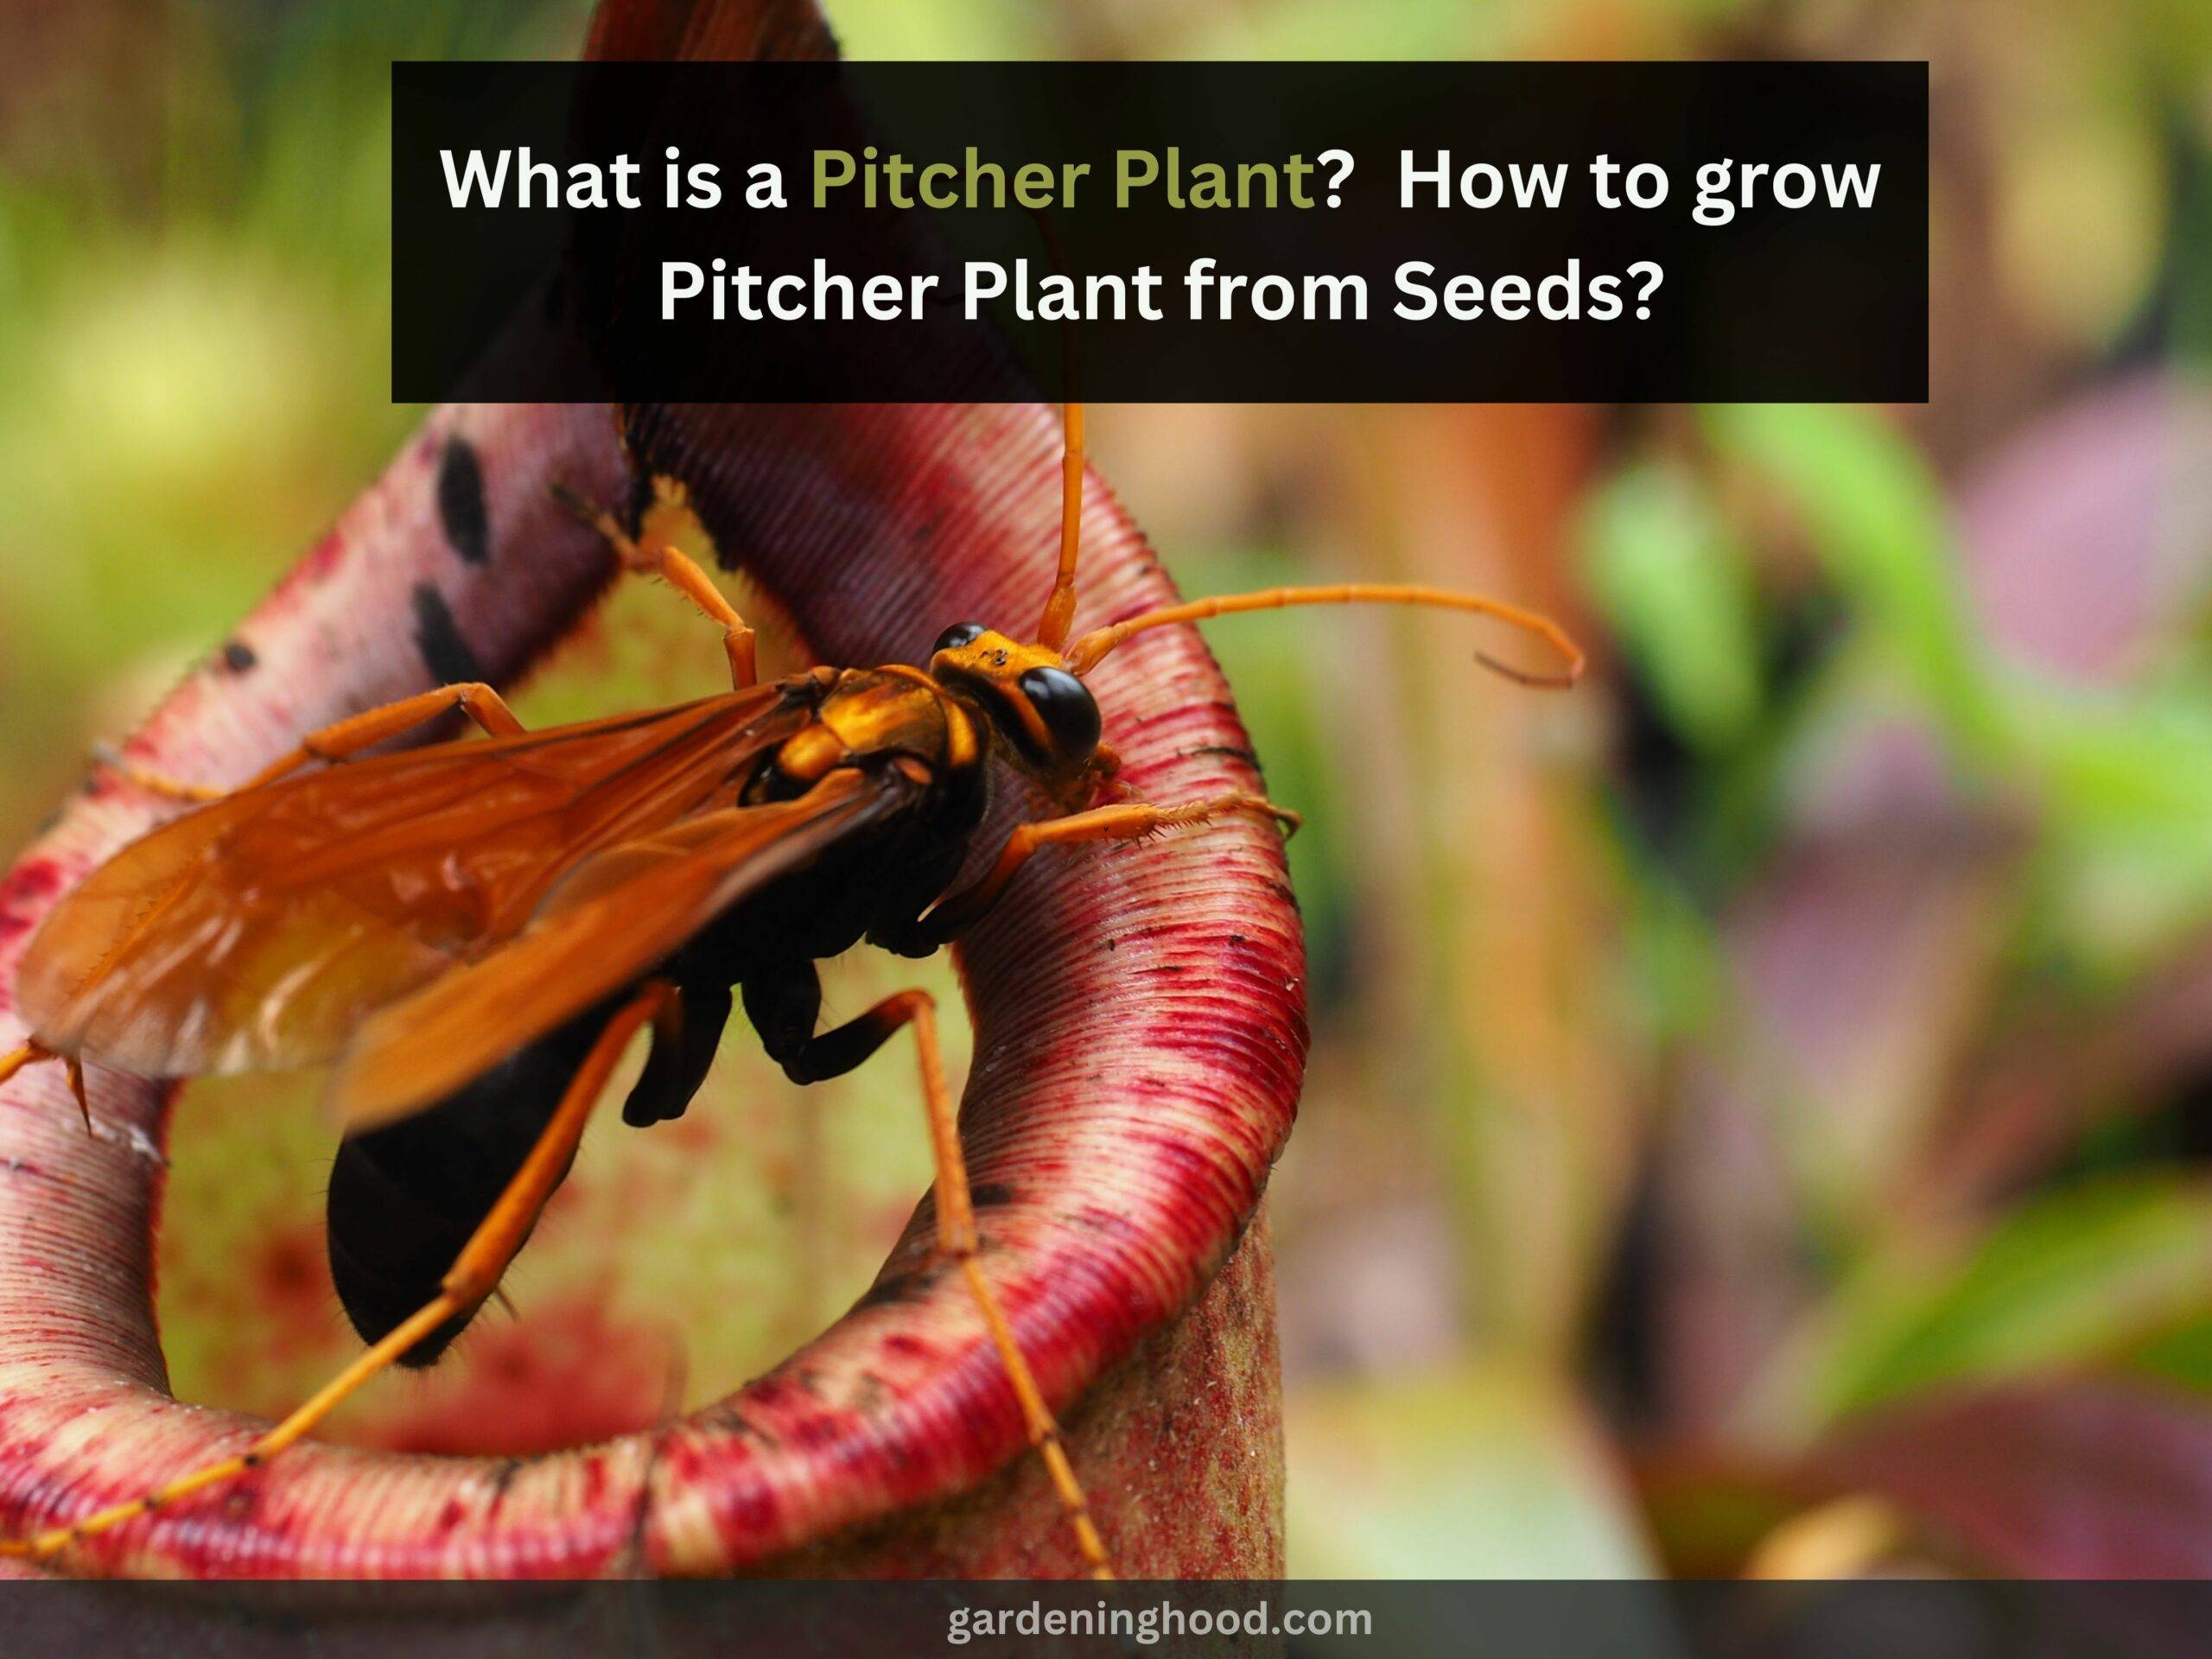 What is a Pitcher Plant? - How to grow Pitcher Plant from Seeds?